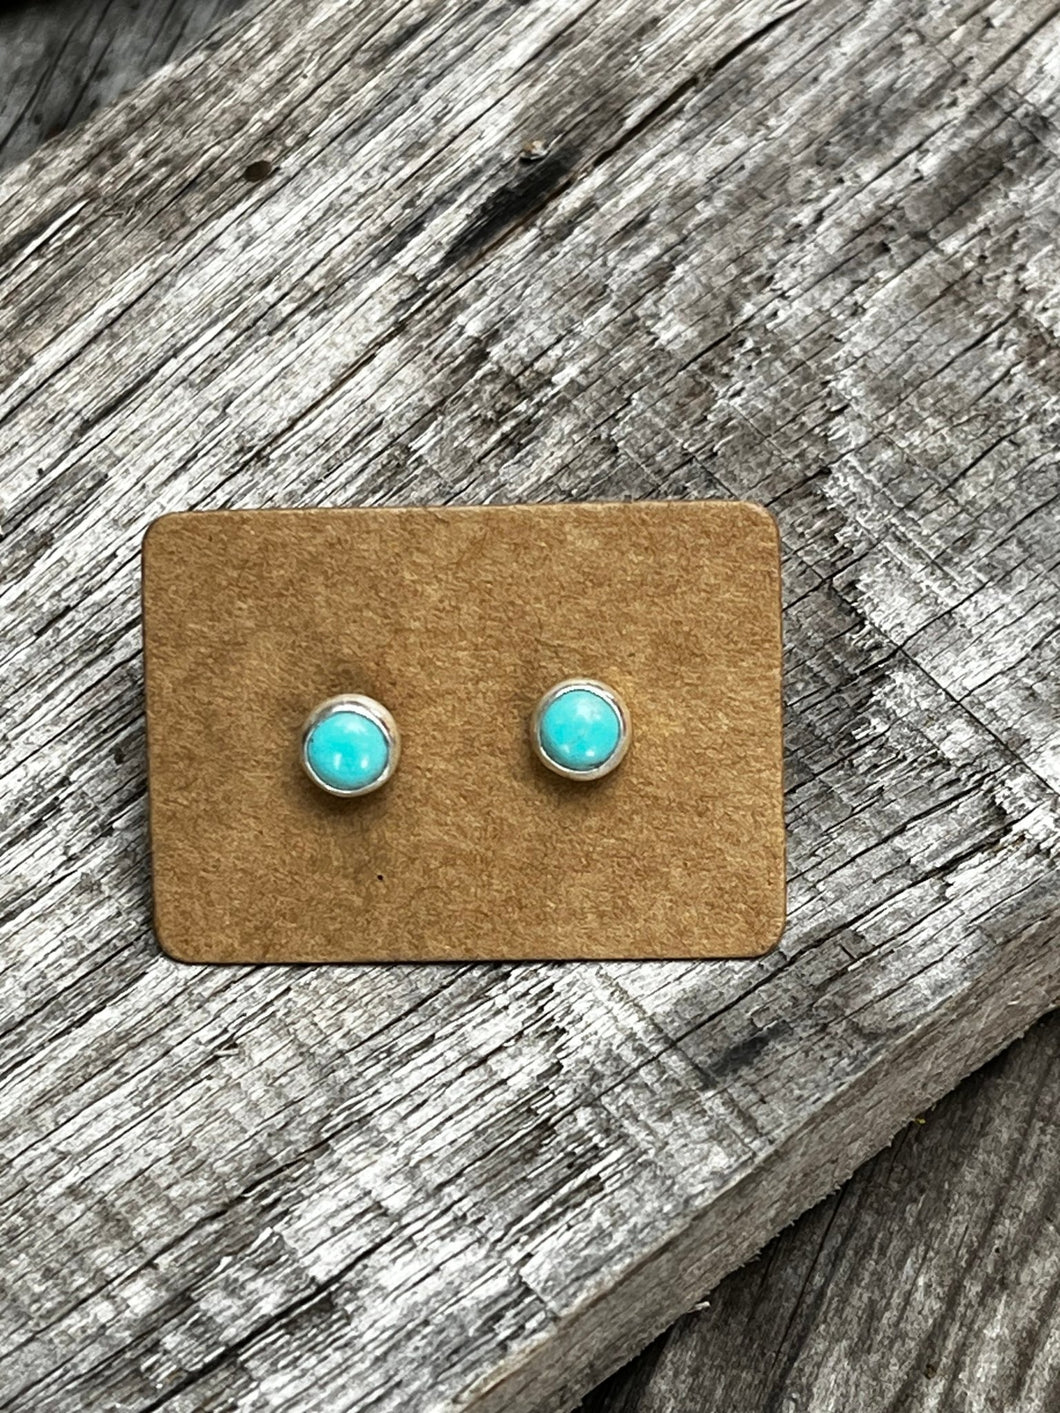 Minimalist Round Turquoise Sterling Silver Stud Earrings - Taylor Made Silver